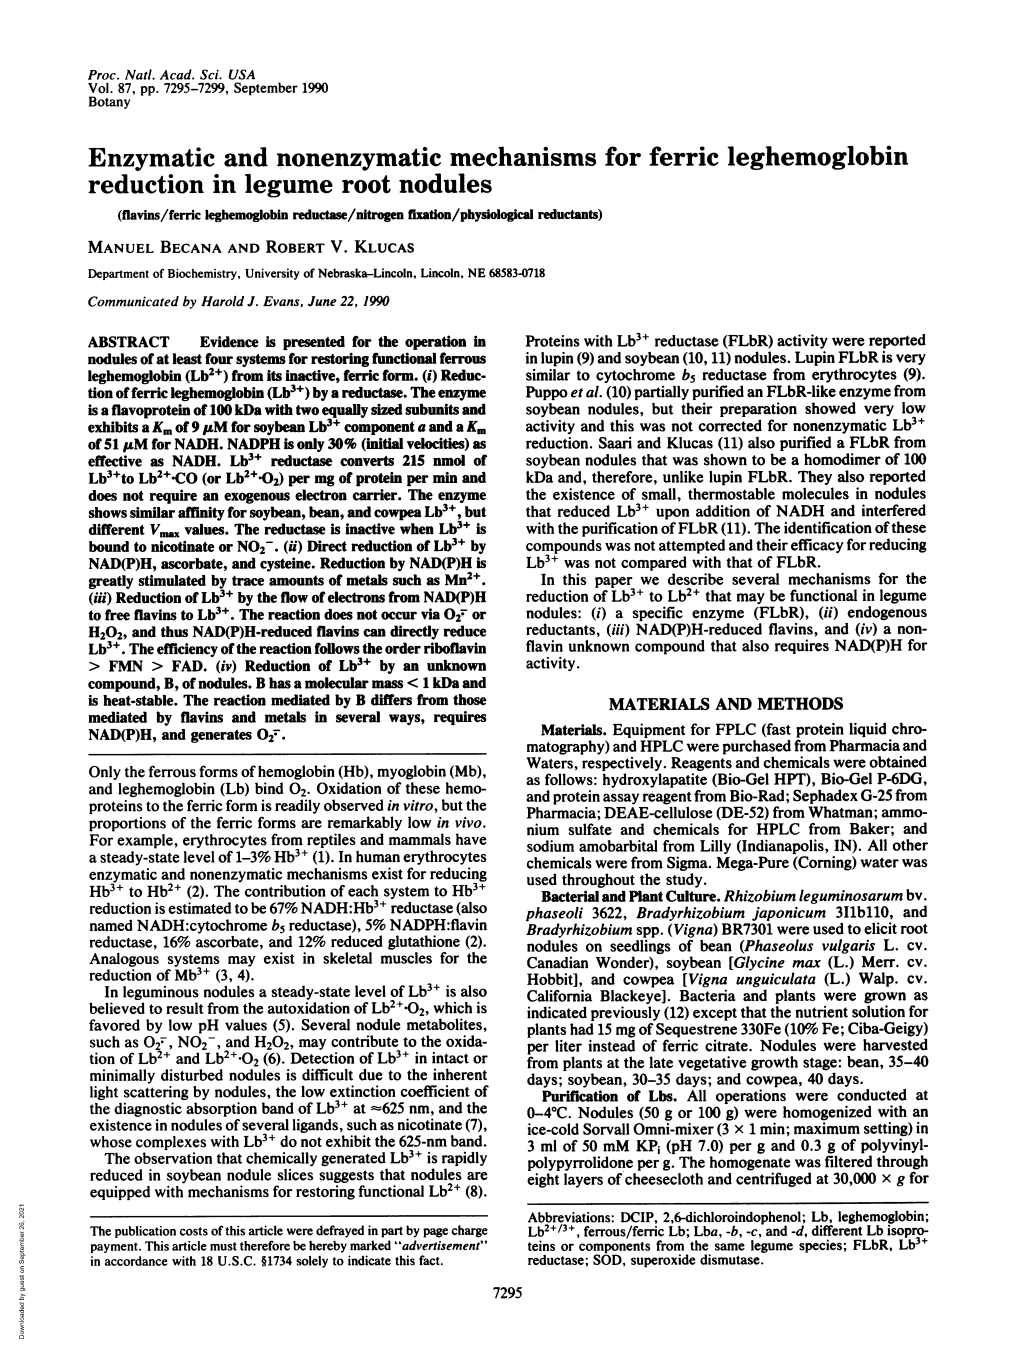 Reduction in Legume Root Nodules (Flavins/Ferric Leghemoglobin Reductase/Nitrogen Fixadtion/Physiological Reductants) MANUEL BECANA and ROBERT V